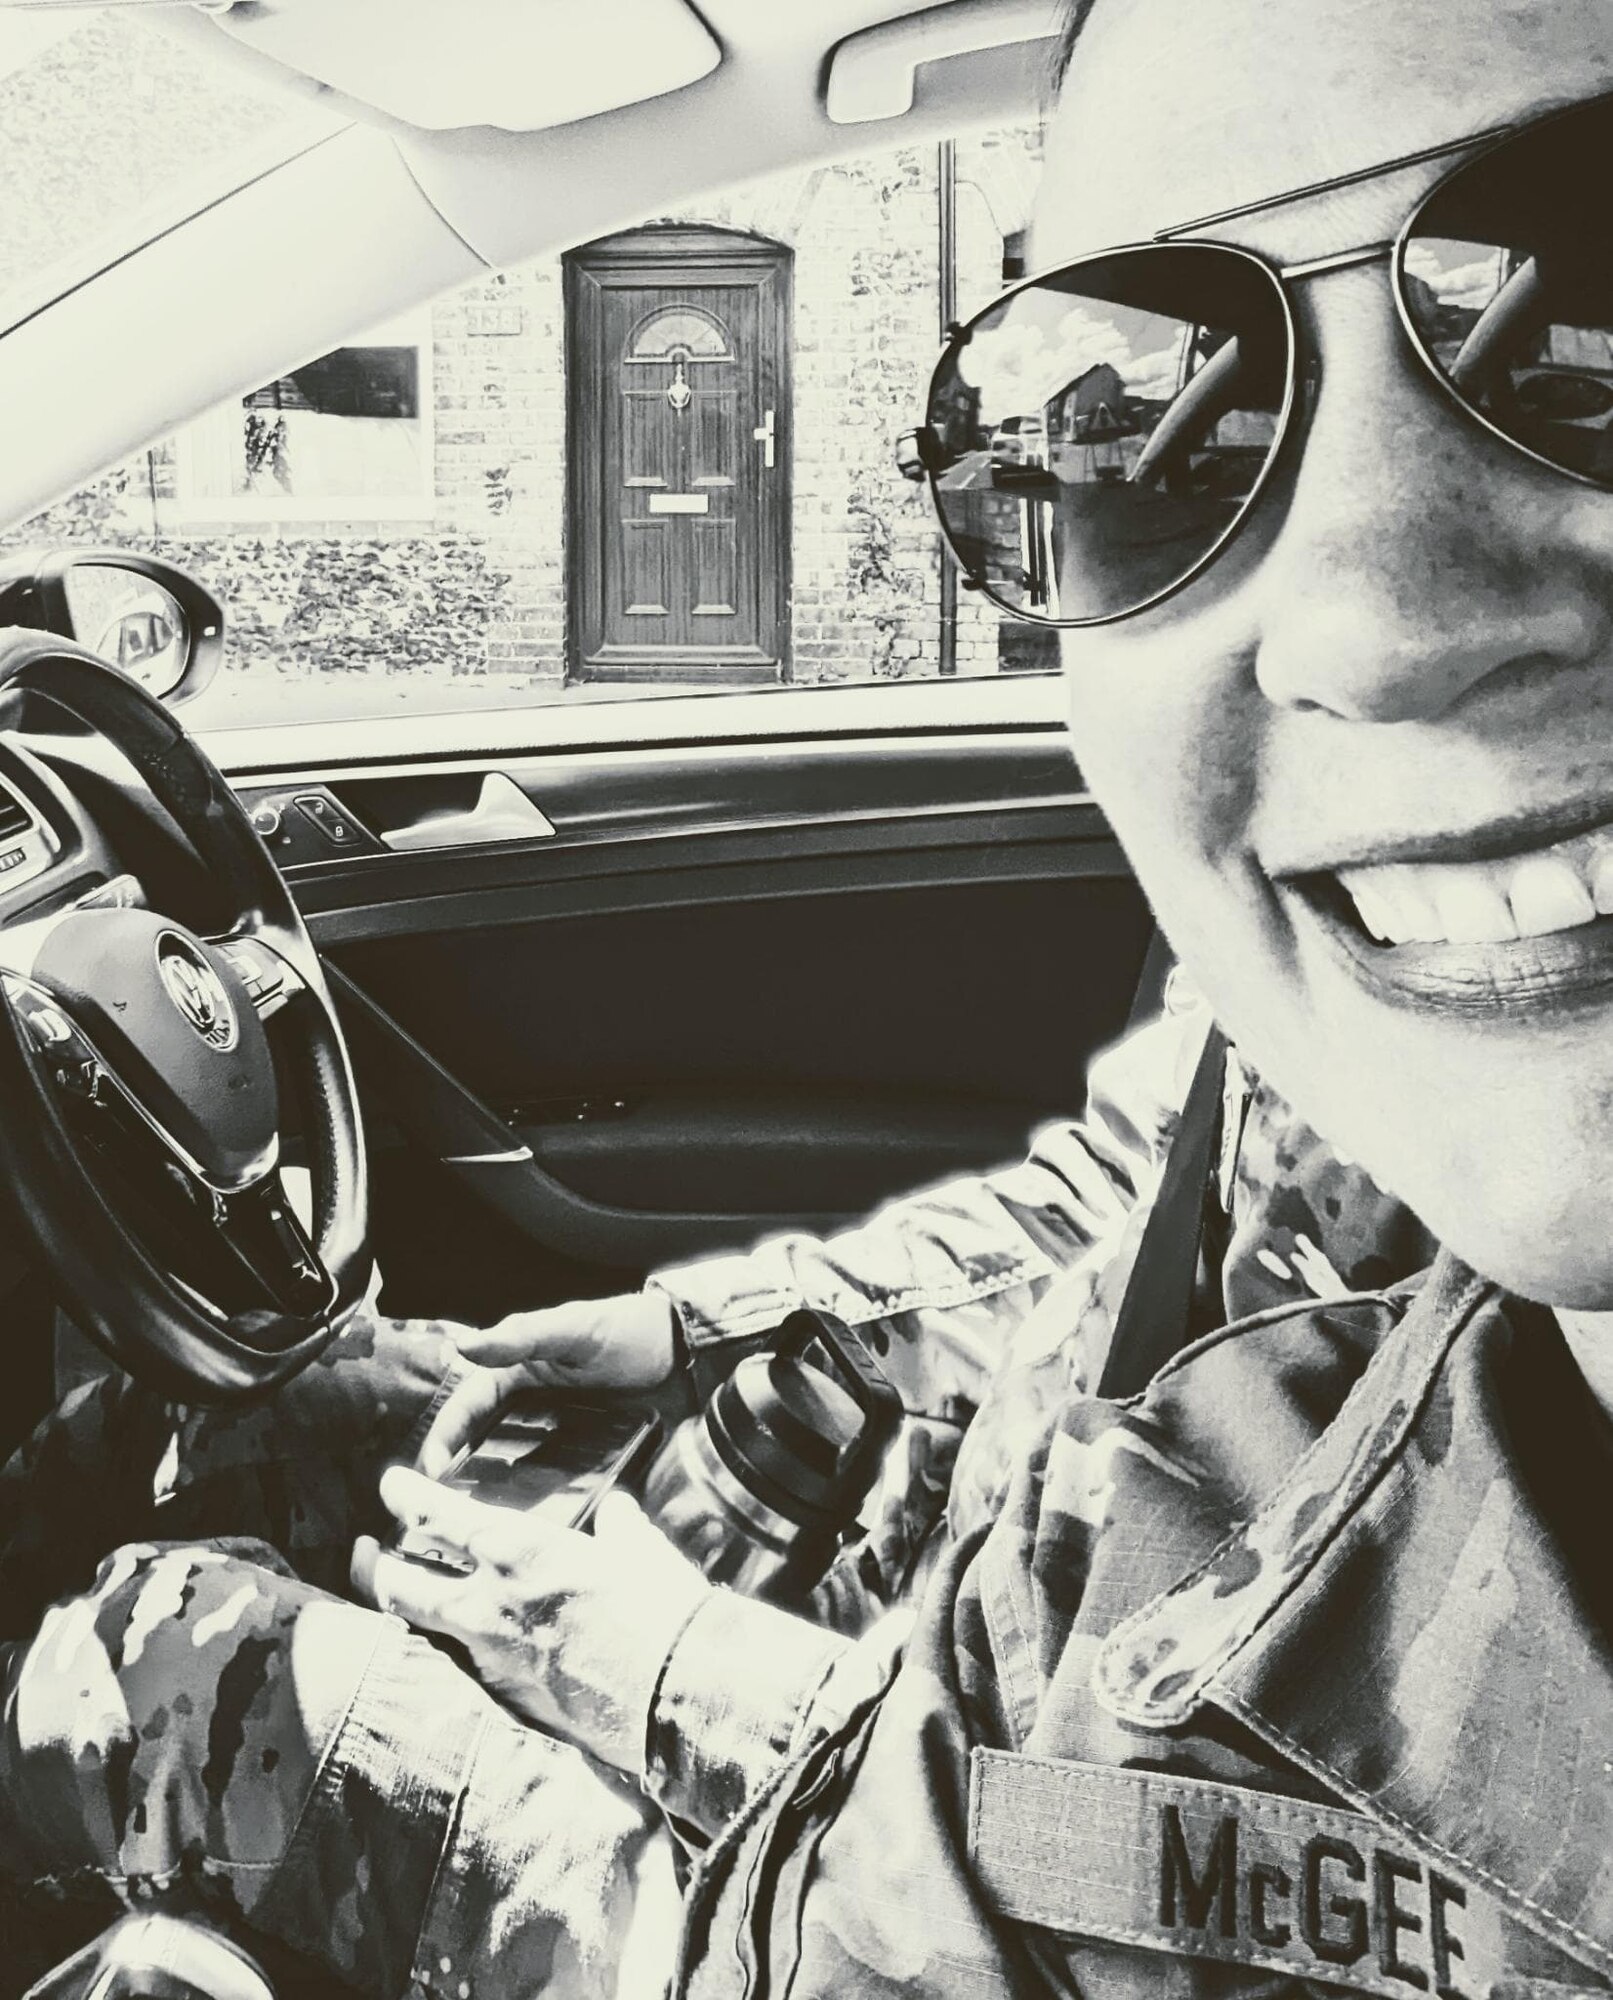 A black-and-white photo of a smiling woman in aviator sunglasses in the passenger seat of a car. The front door of a house can be seen through the driver's window.